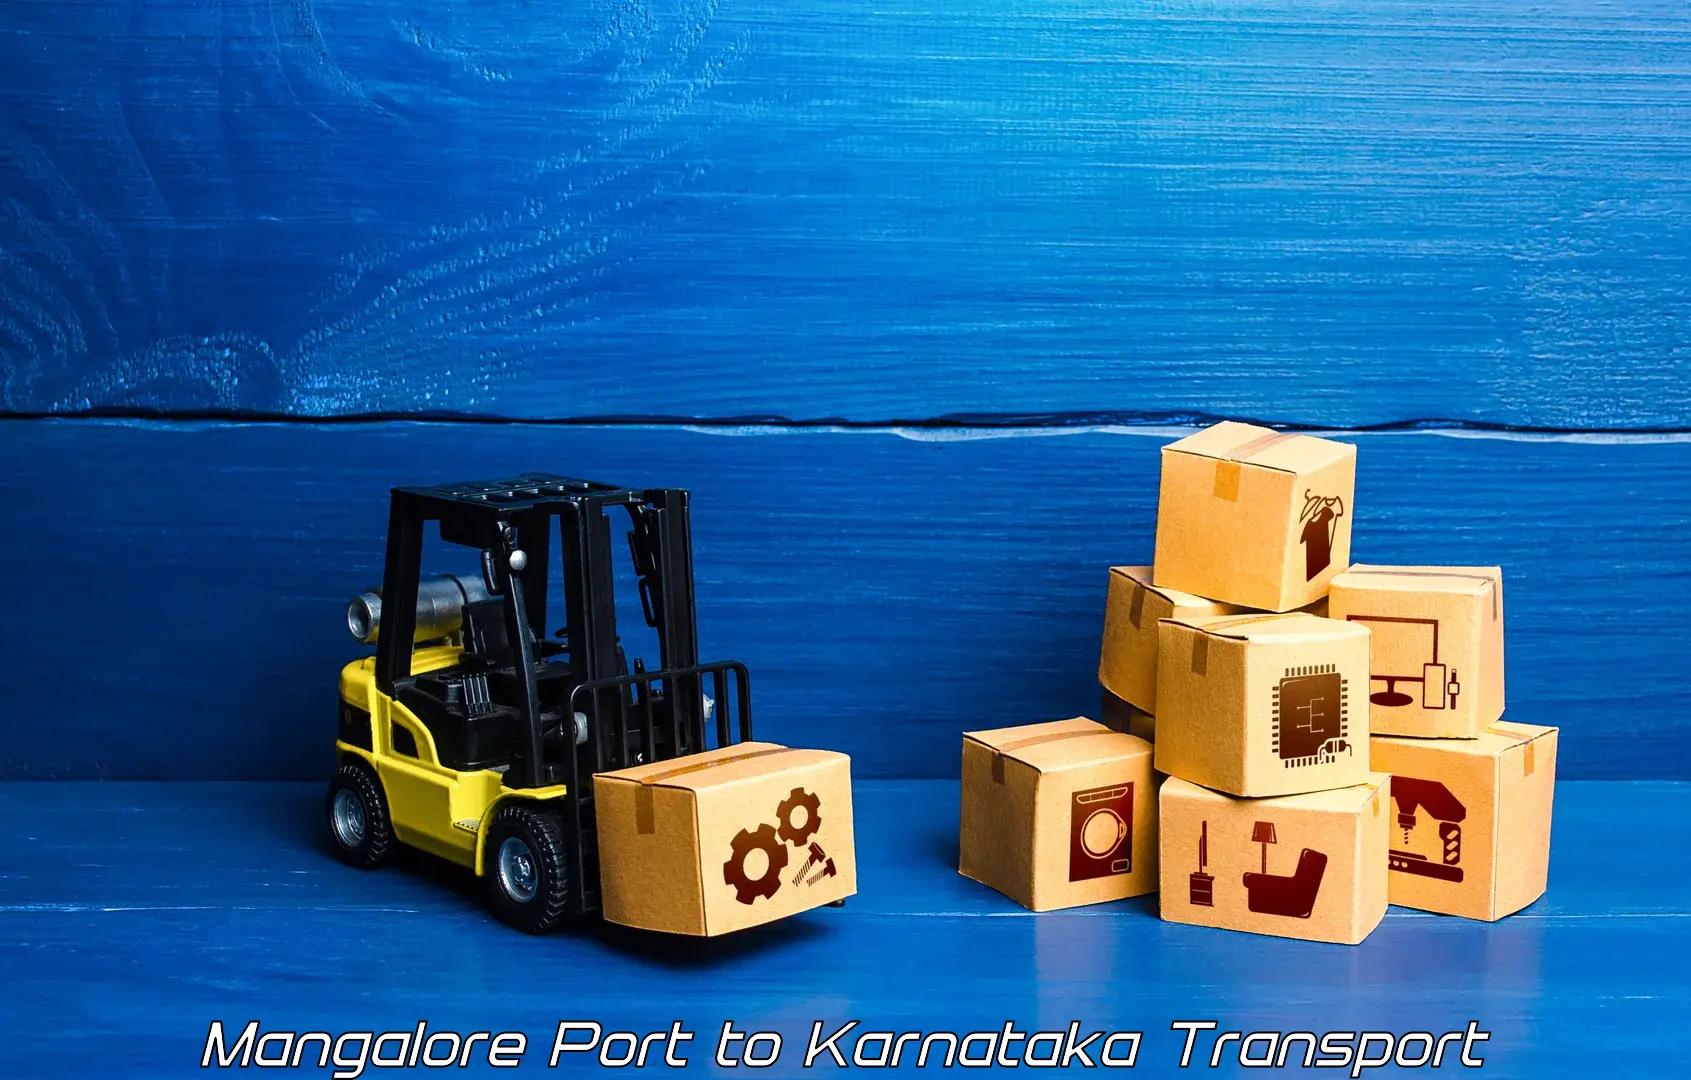 Daily parcel service transport in Mangalore Port to Yellare